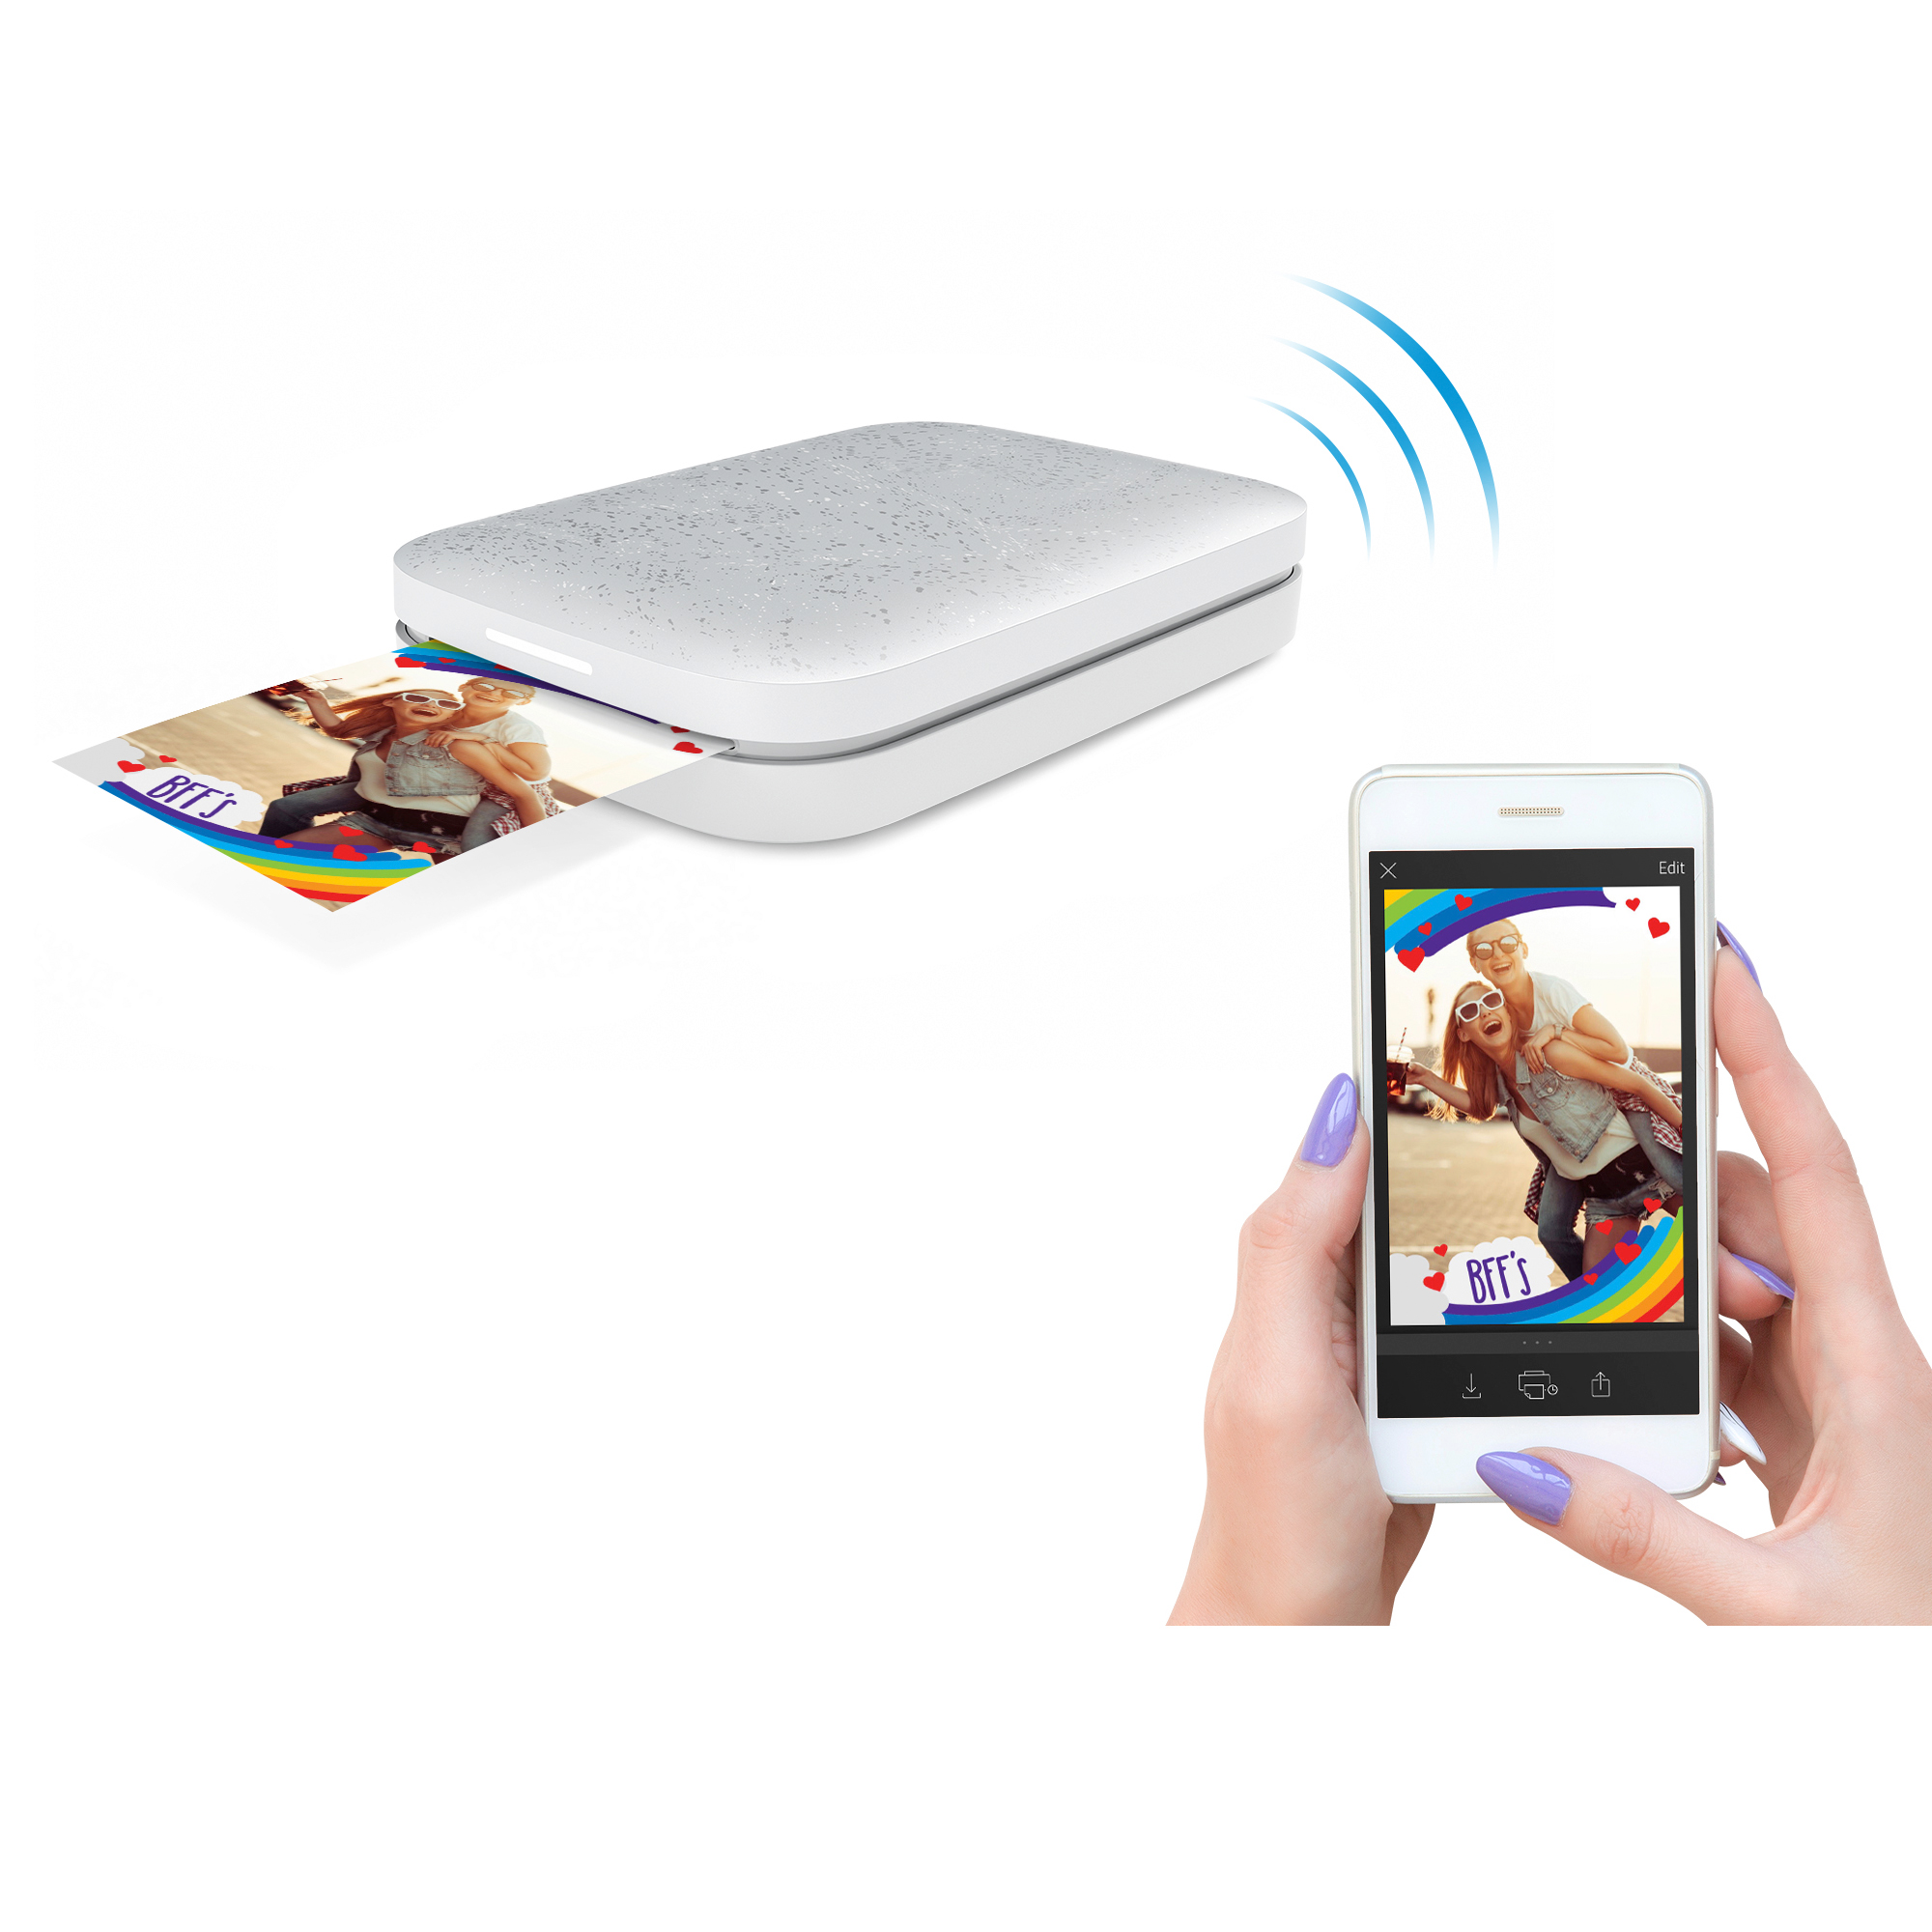 HP Sprocket Portable 2x3" Instant Photo Printer (Luna Pearl), for Ios or Android - image 5 of 8